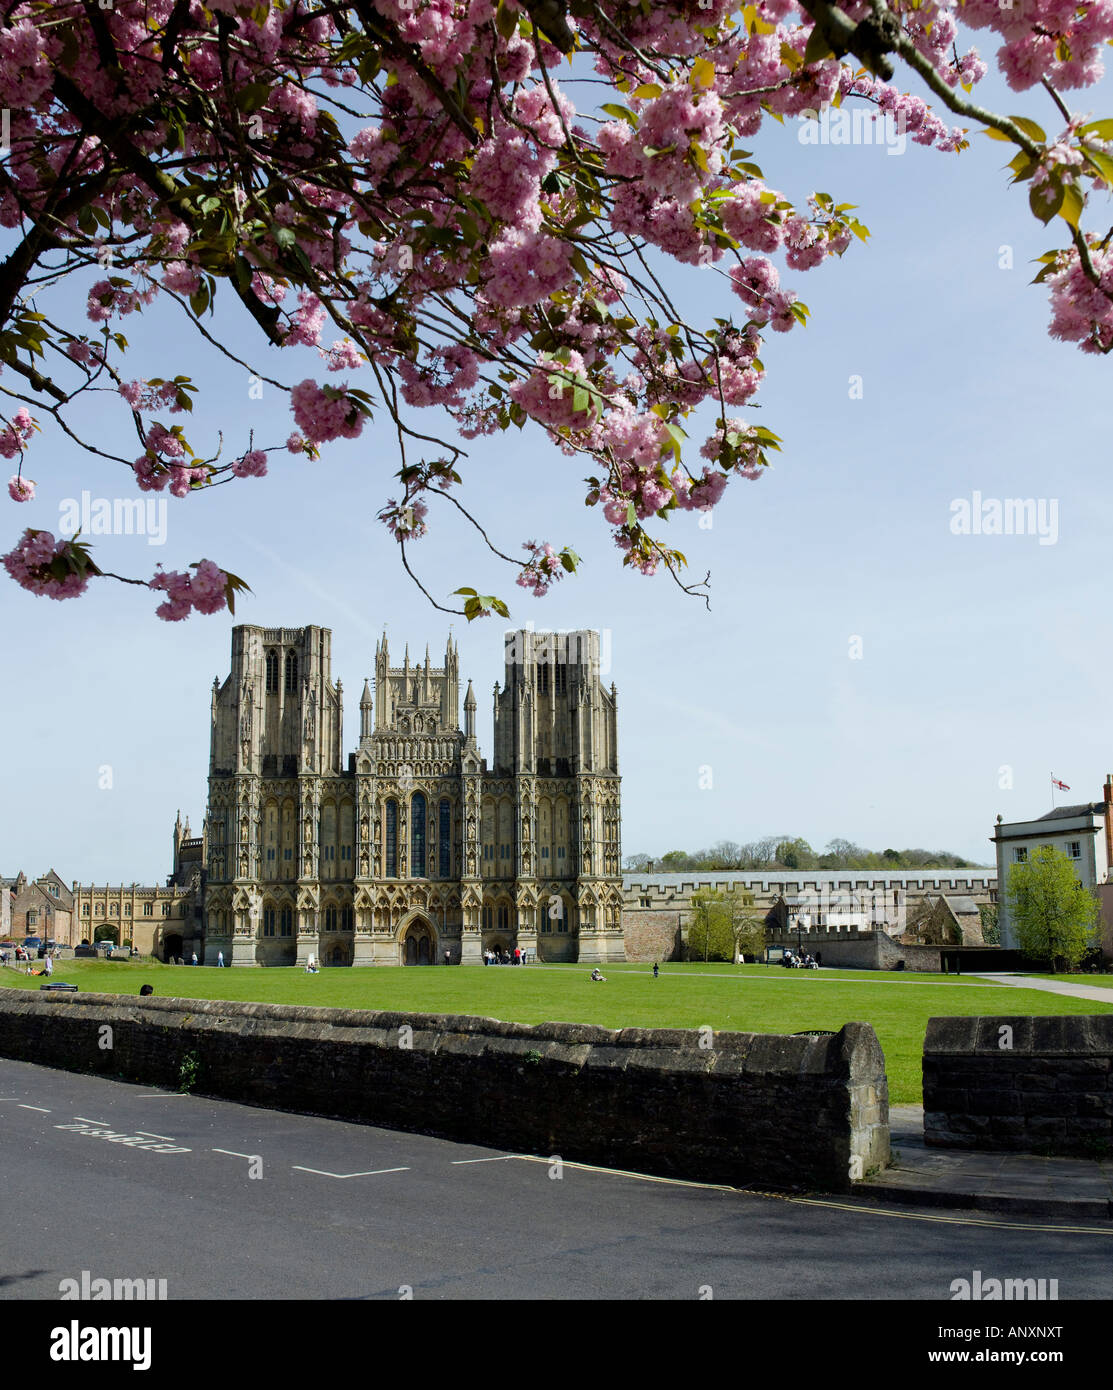 WELLS CATHEDRAL ET CHERRY BLOSSOM WELLS SOMERSET WEST COUNTRY ENGLAND UK Banque D'Images